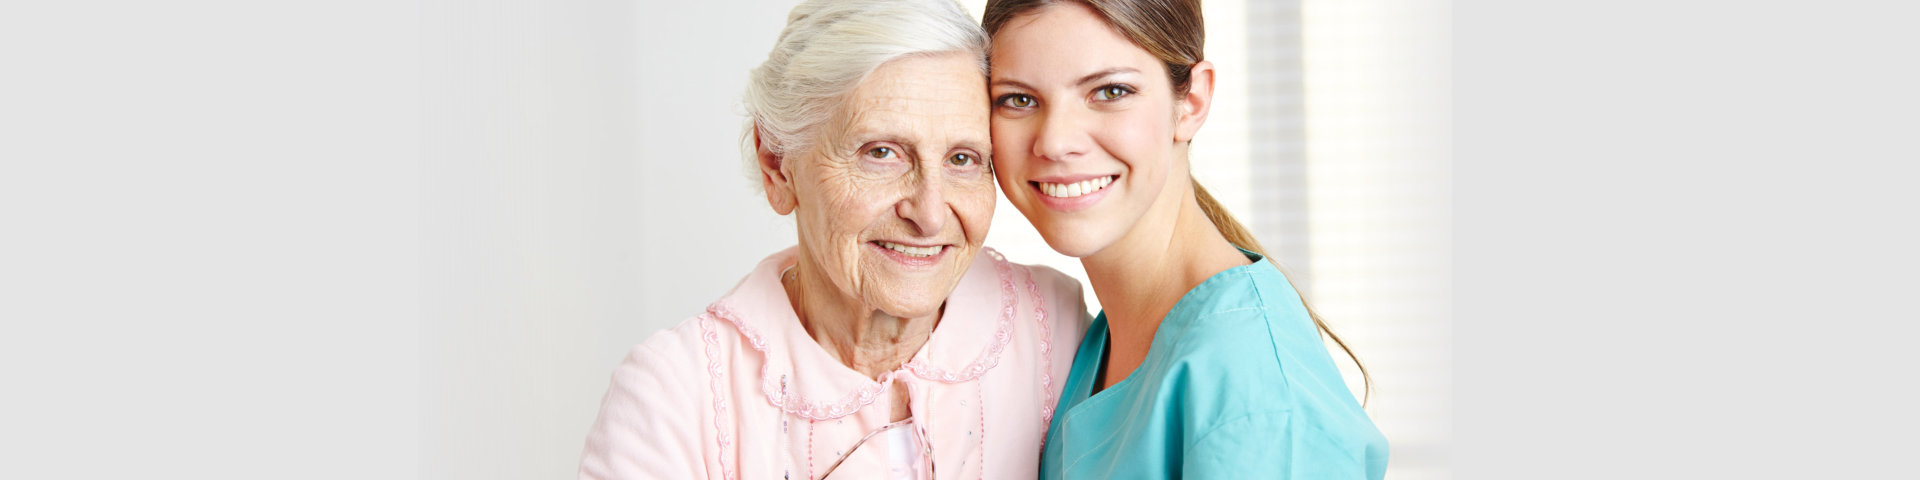 elderly woman with her caregiver smiling